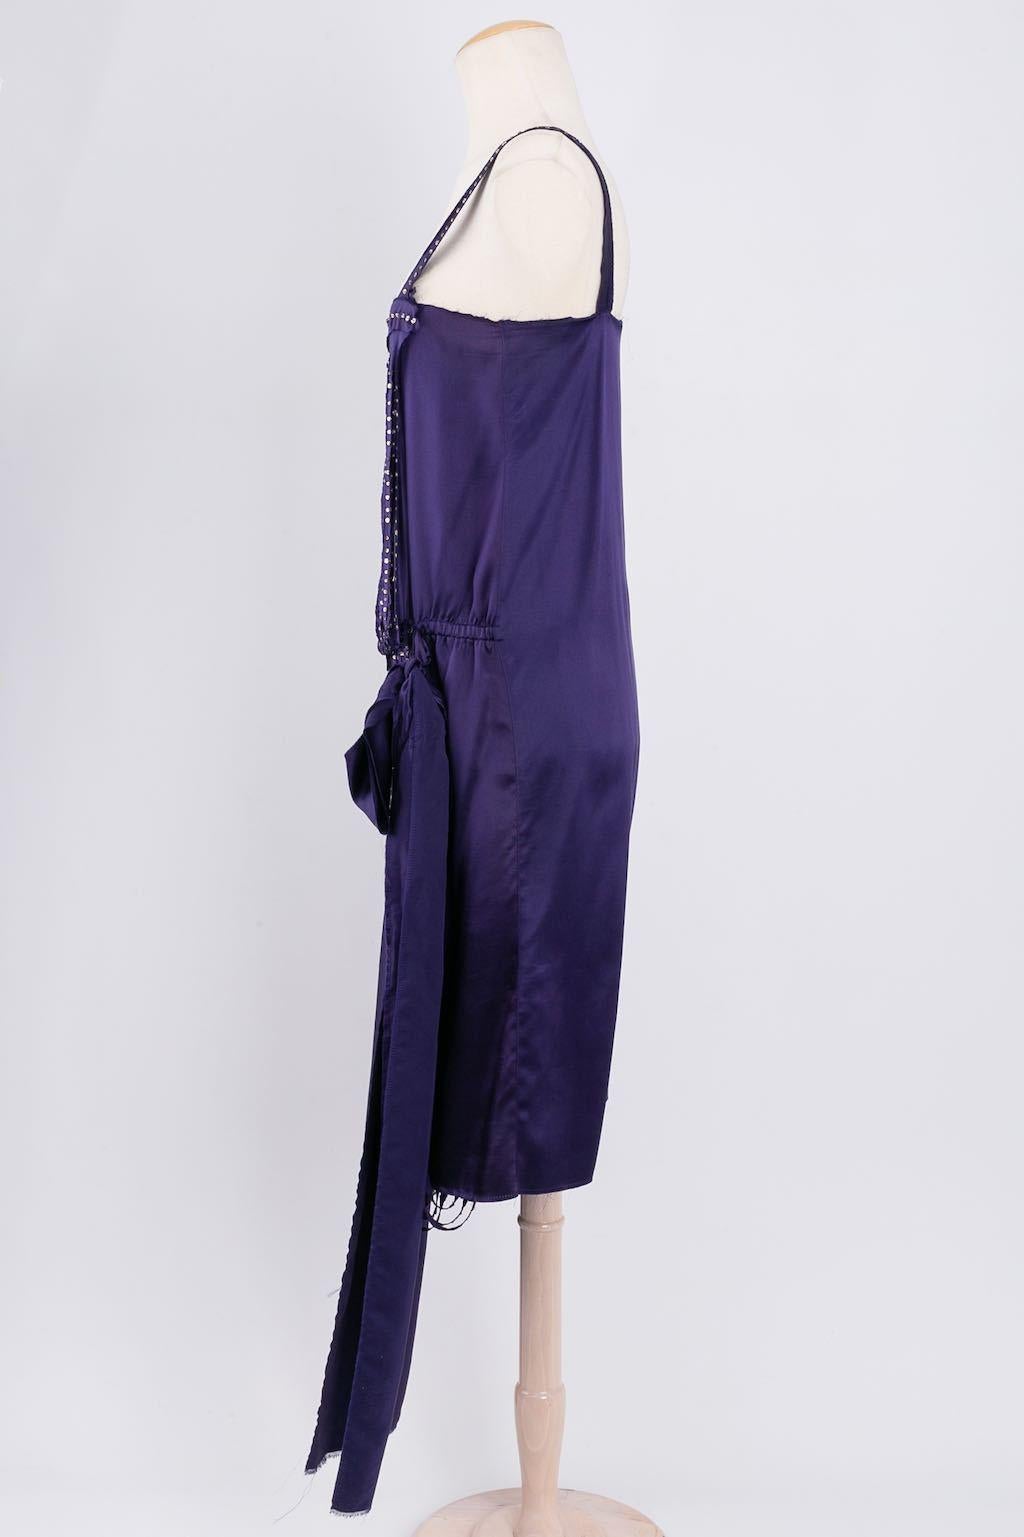 Lanvin - Dress composed of purple silk embellished with rhinestones. No composition or size tag, it fits a size 38FR.
Winter Collection, 2004


Additional information: 
Dimensions: 
Bust: 43 cm (16.92